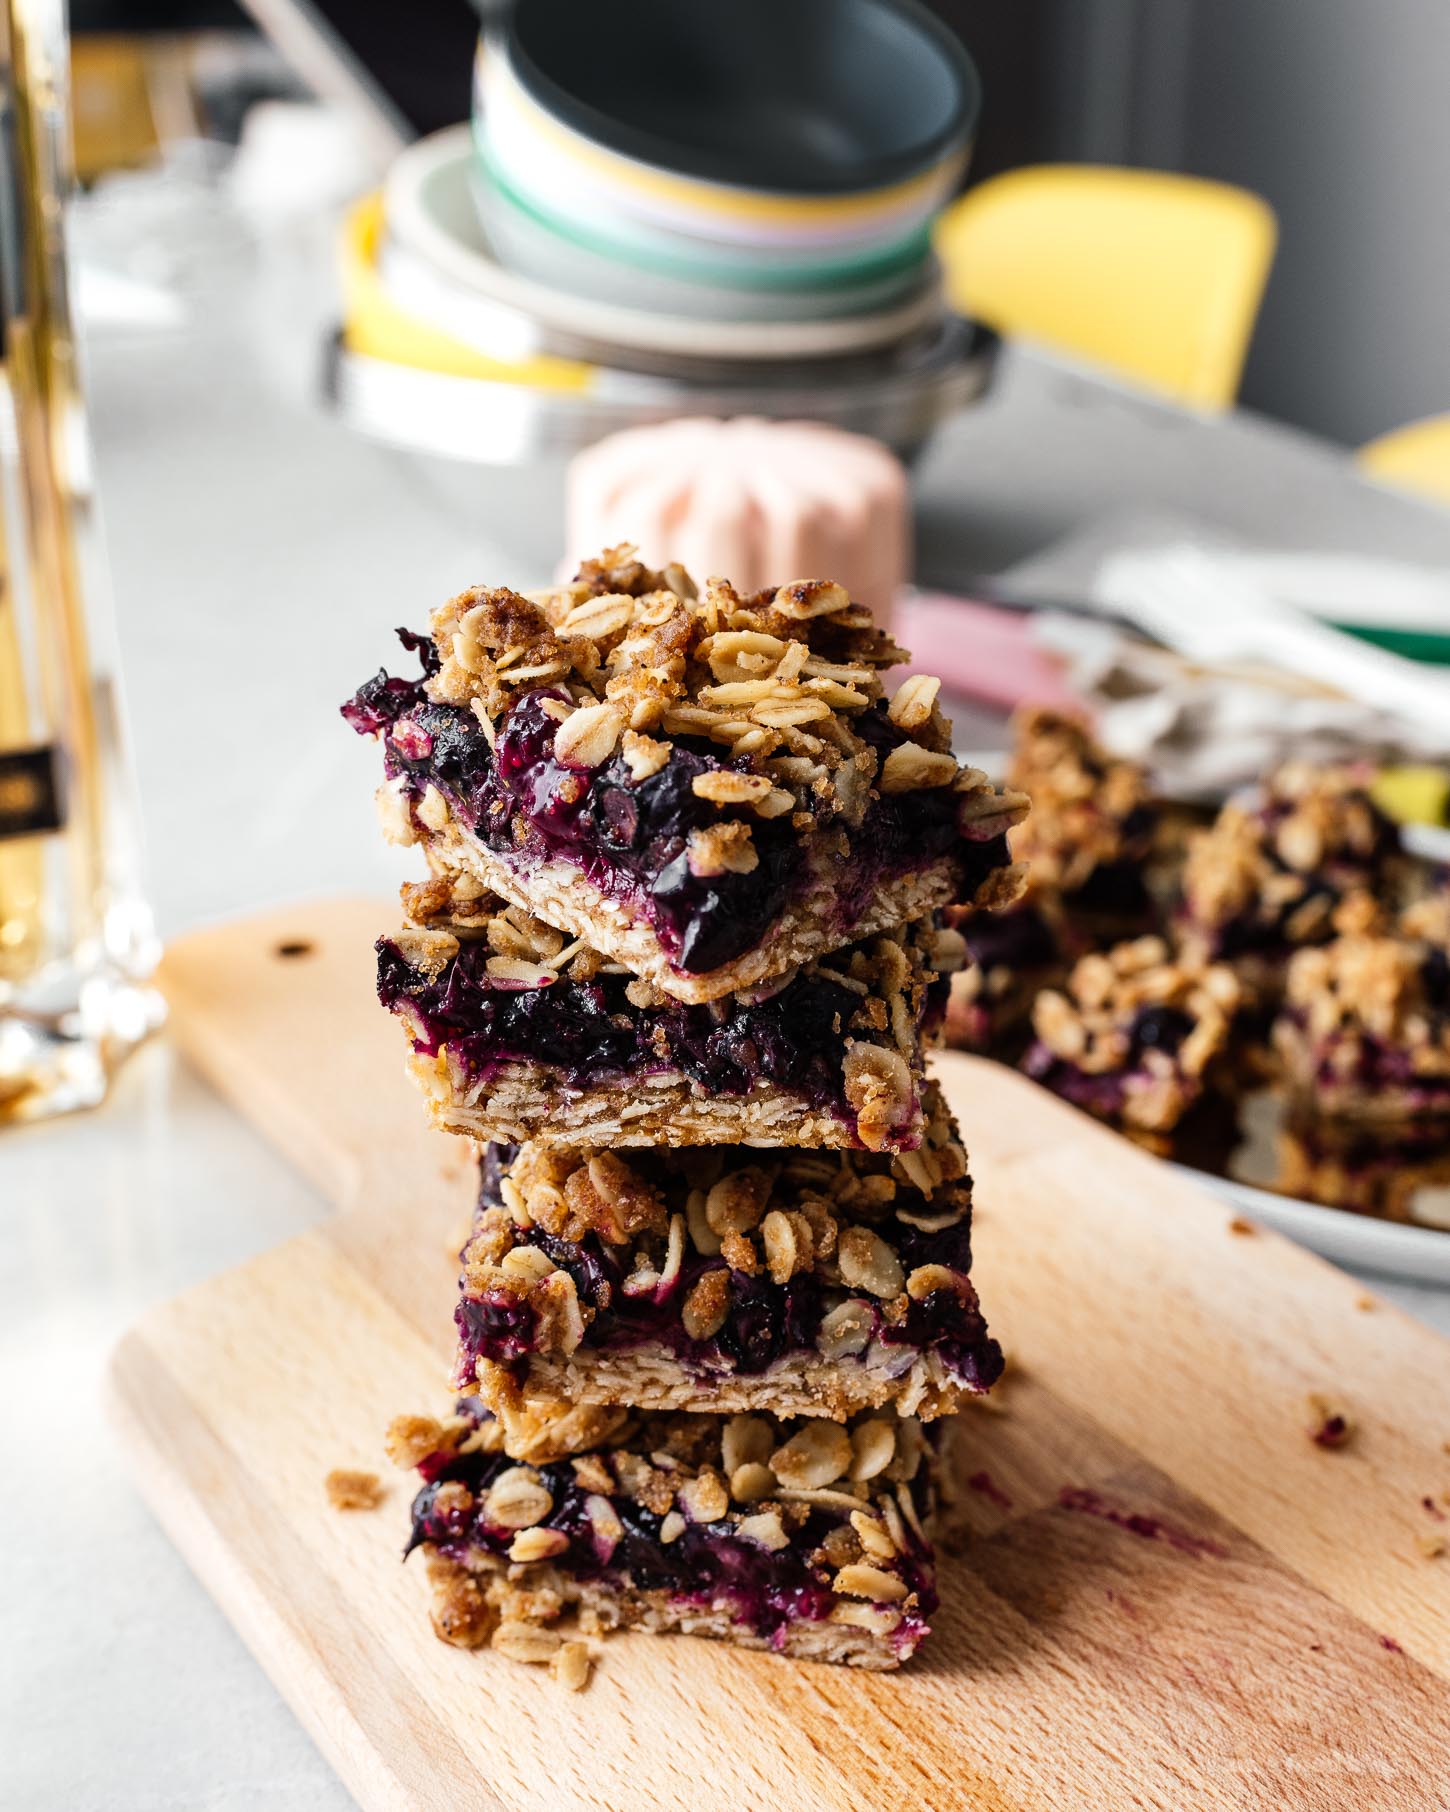 These browned butter blueberry oatmeal crumble bars are bursting with all the goodness of sweet summertime blueberries, nutty browned butter, and heart healthy oats. Make a batch today! #brownedbutter #brownbutter #recipes #dessert #oatbars #blueberrybars #blueberries #oatmeal